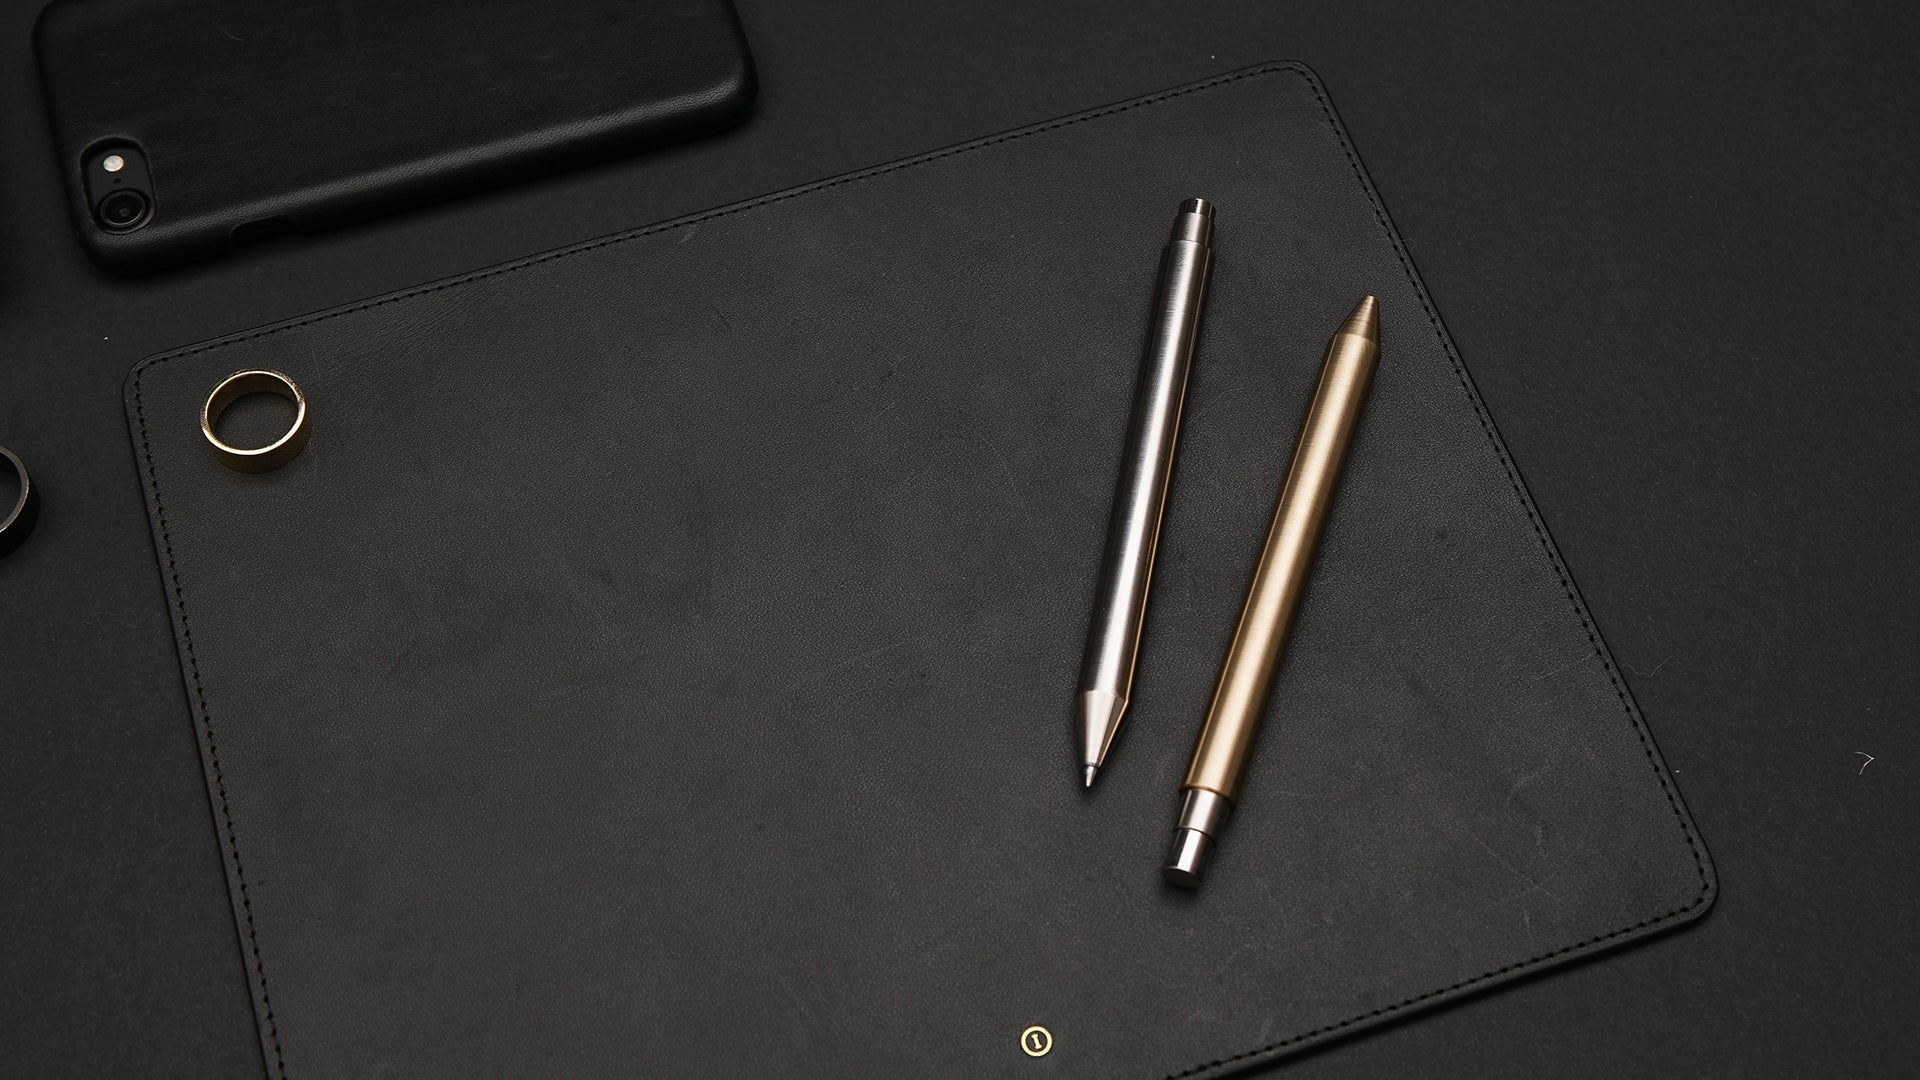 PEN GAME PROPER: ELEMENTS OF OWNING A FINE PEN - INVENTERY